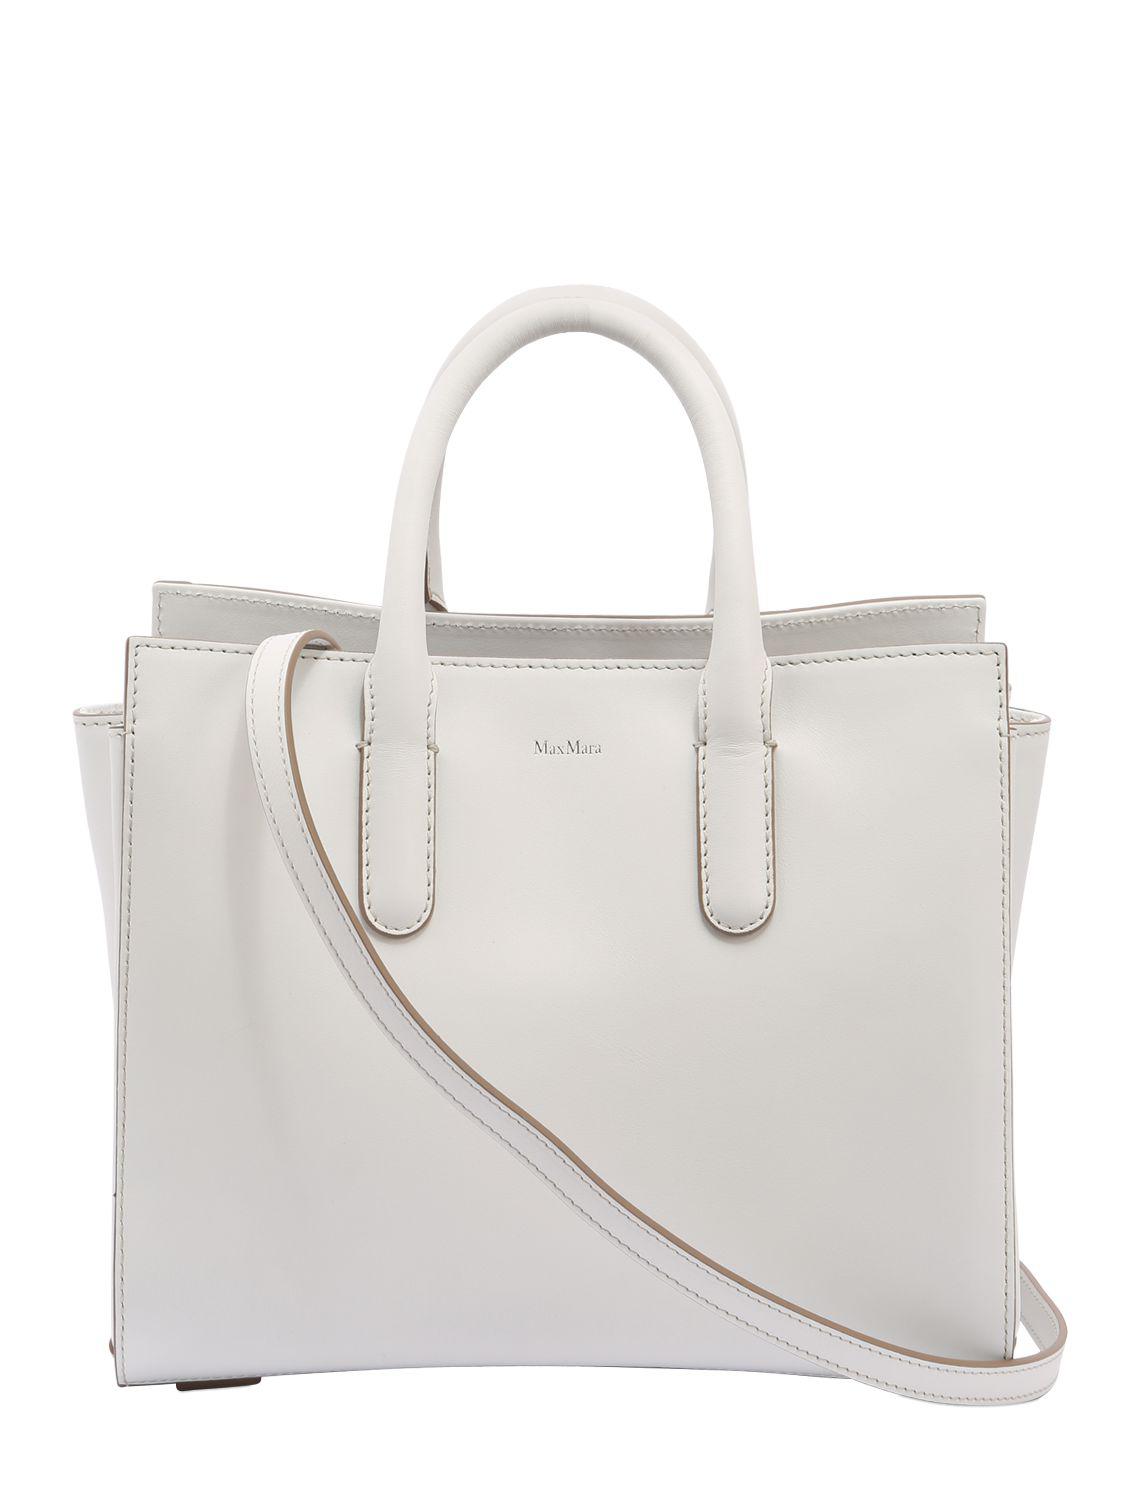 Lyst - Max Mara Small Leather Top Handle Bag in White